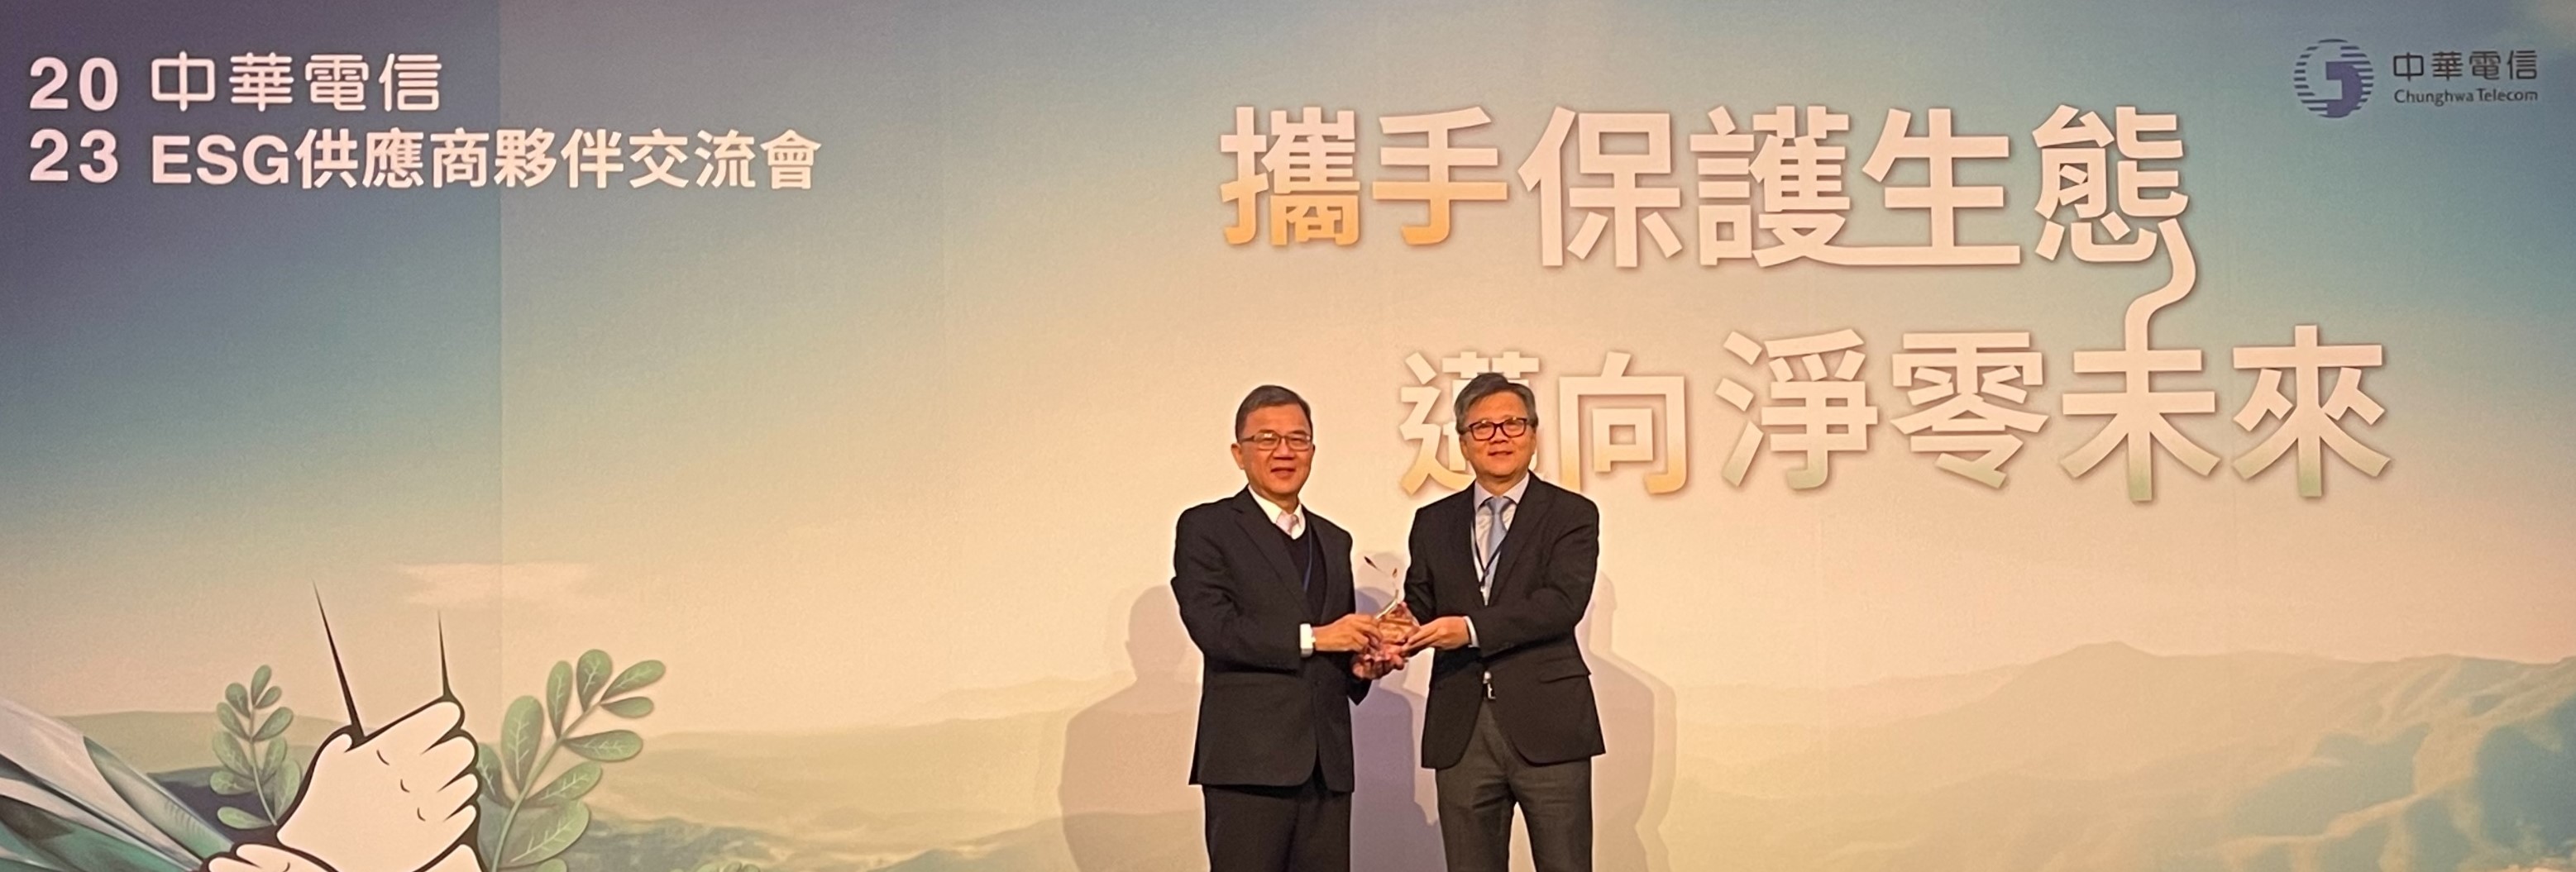 Arcadyan presented with "Carbon Reduction Pioneer Award" from Chunghwa Telecom.